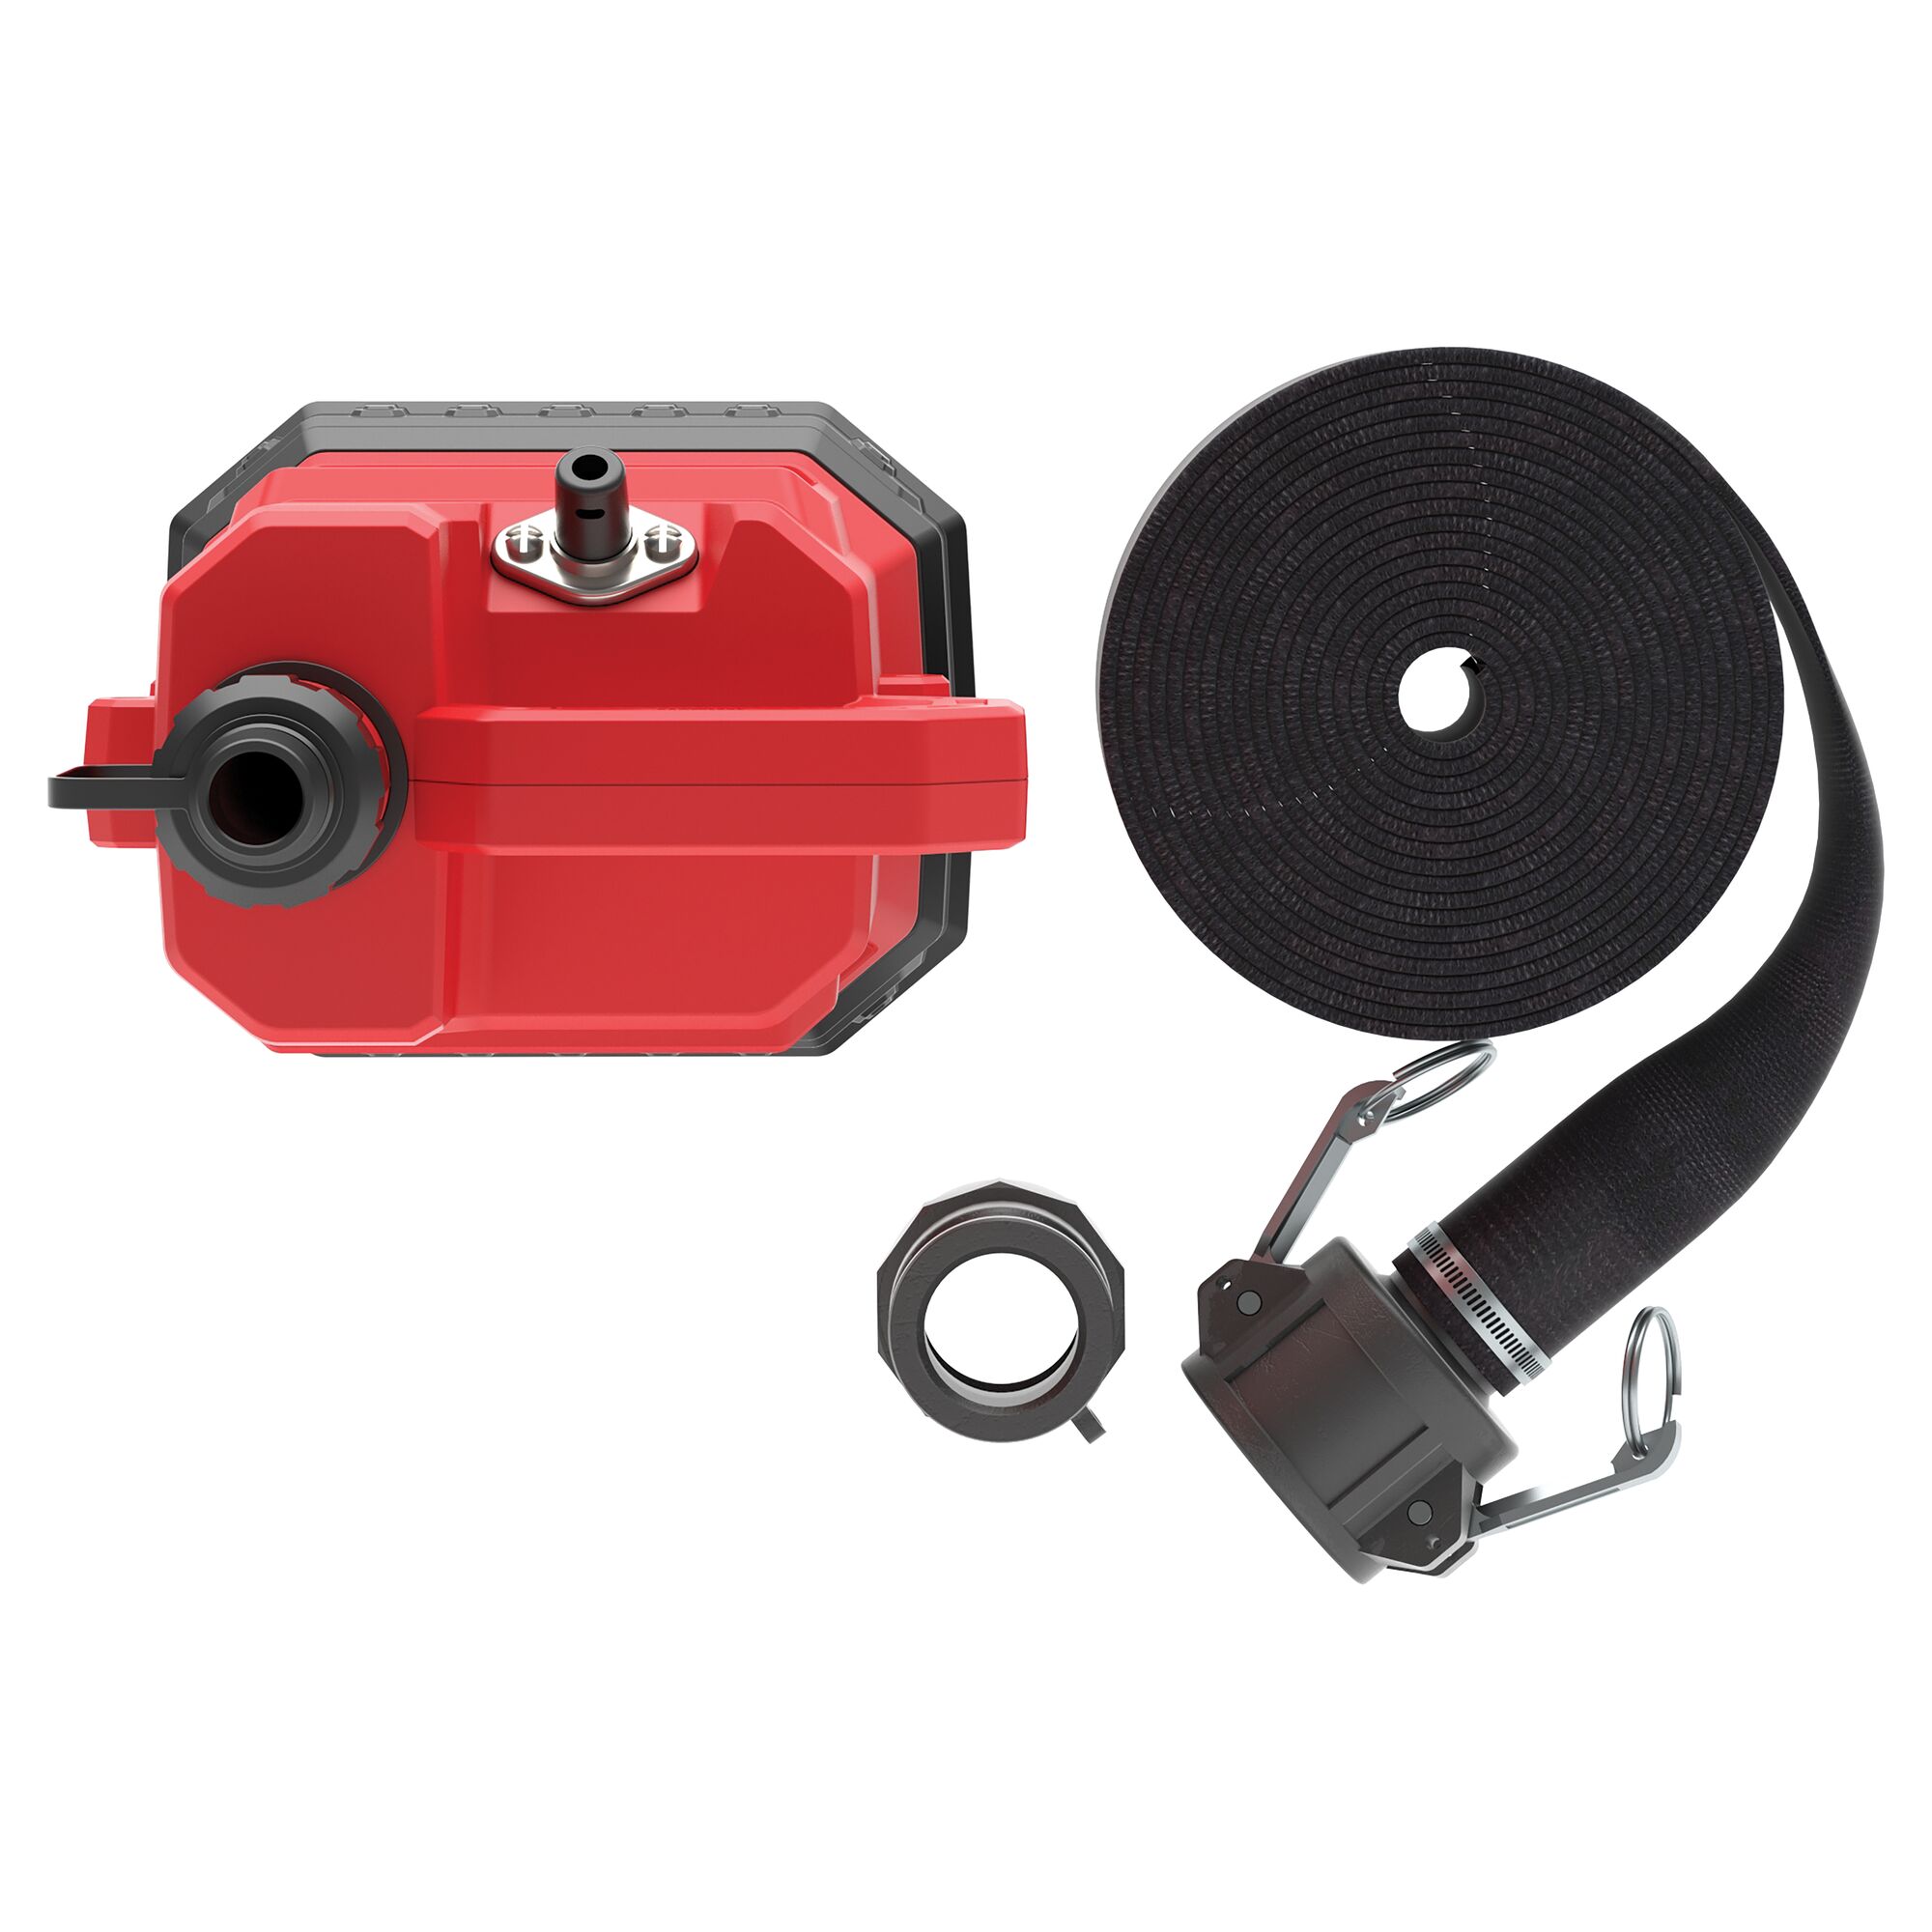 1-4HP WATER/UTILITY PUMP REINFORCED THERMOPLASTIC SUBMERSIBLE WITH PVC LAYFLAT HOSE KIT AND ADAPTERS TOP VIEW